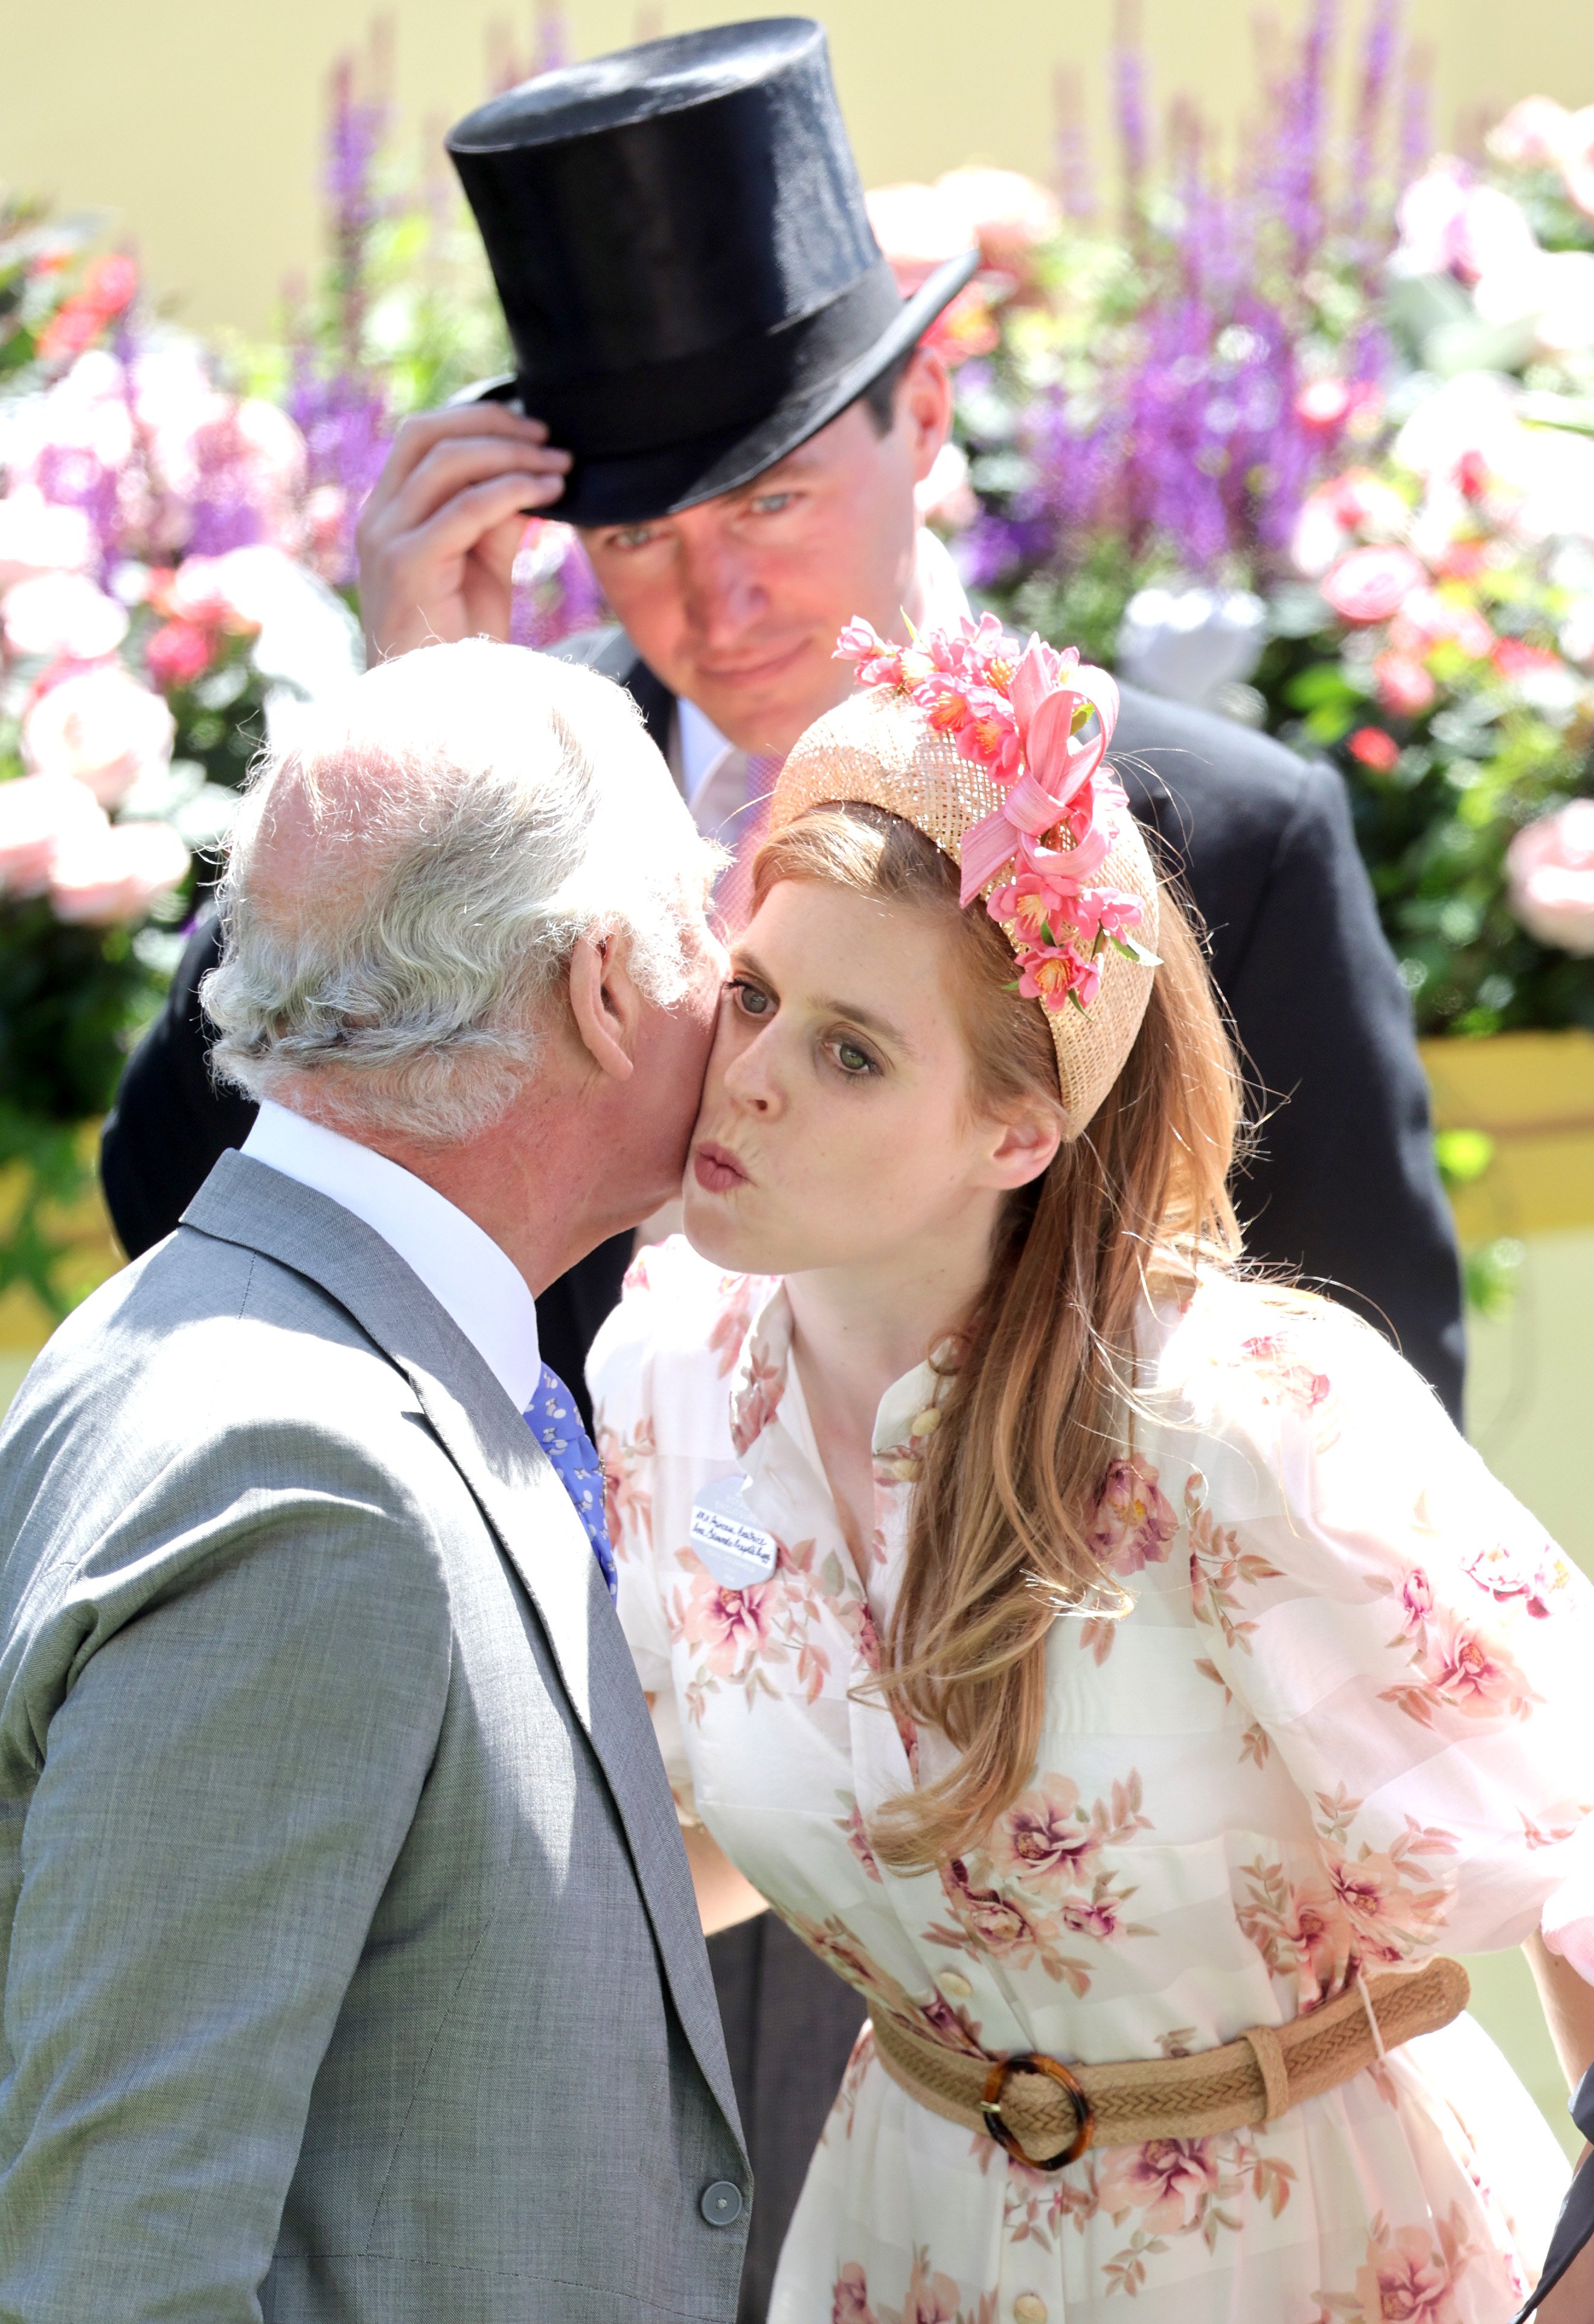 Prince Charles, Prince of Wales and Princess Beatrice of Windsor attends Royal Ascot 2022 at Ascot Racecourse on June 14, 2022 in Ascot, England | Source: Getty Images 